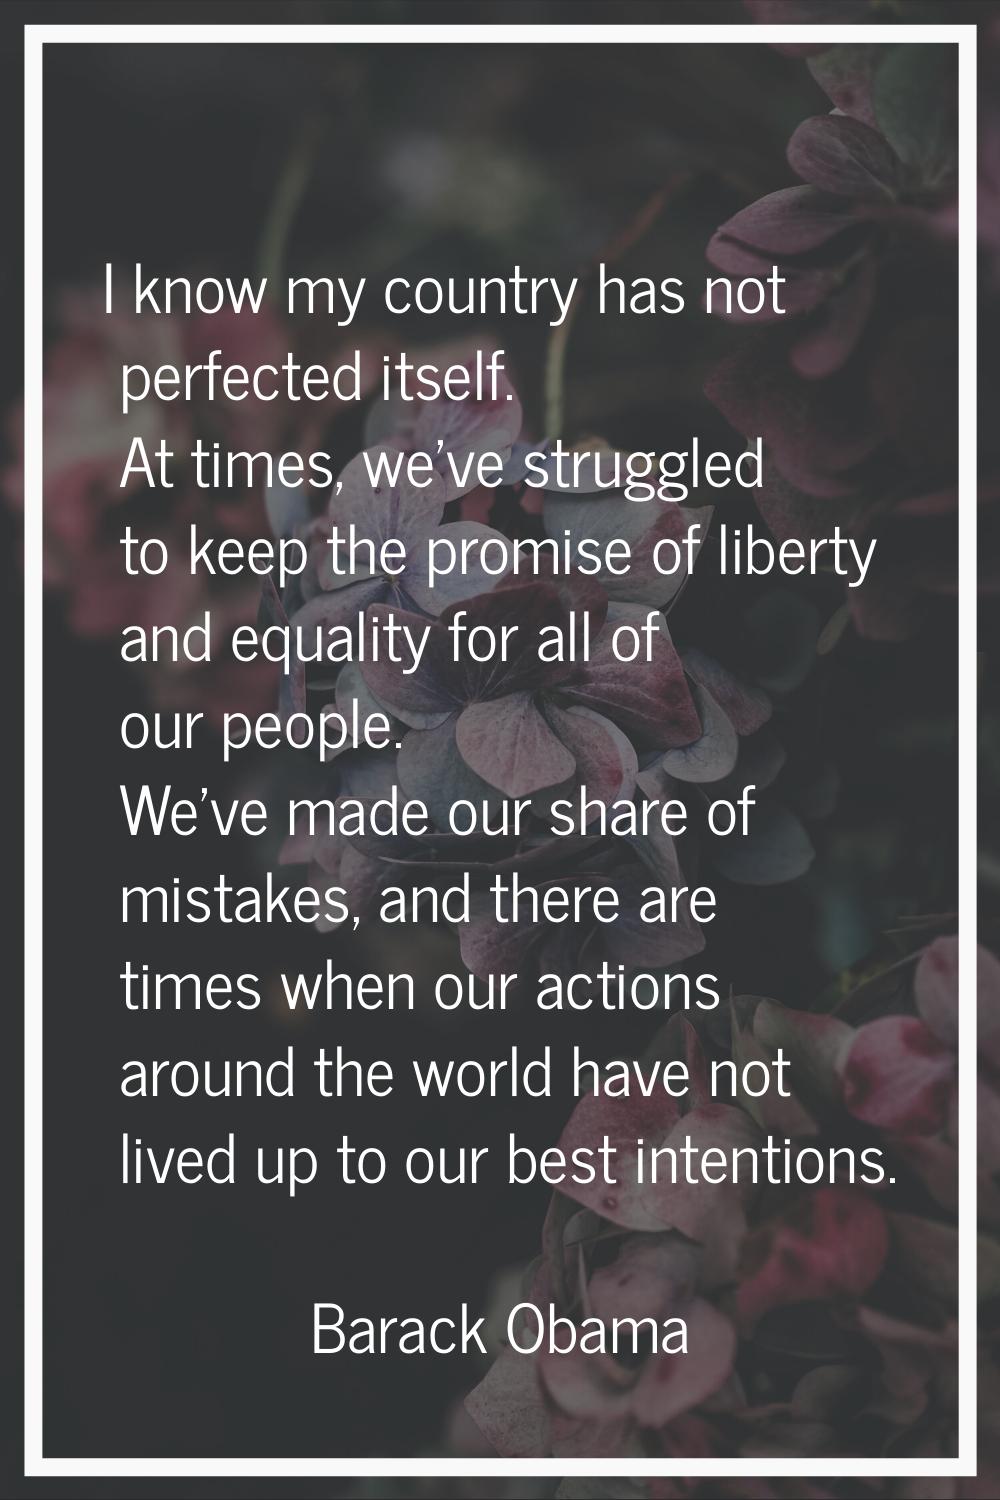 I know my country has not perfected itself. At times, we've struggled to keep the promise of libert